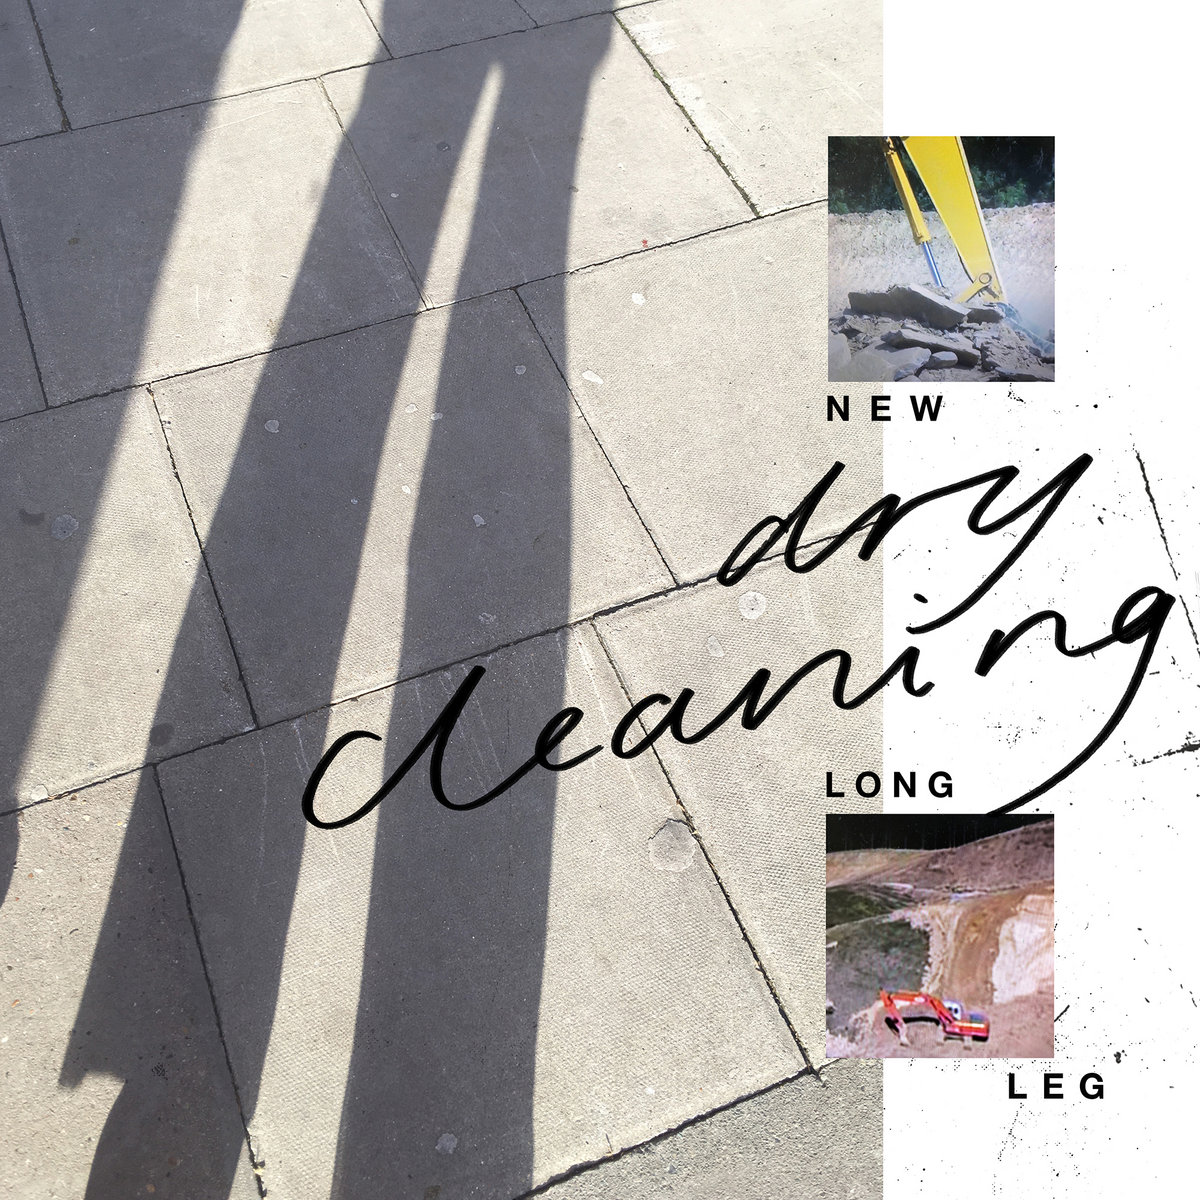 Dry Cleaning – New Long Leg Album Review